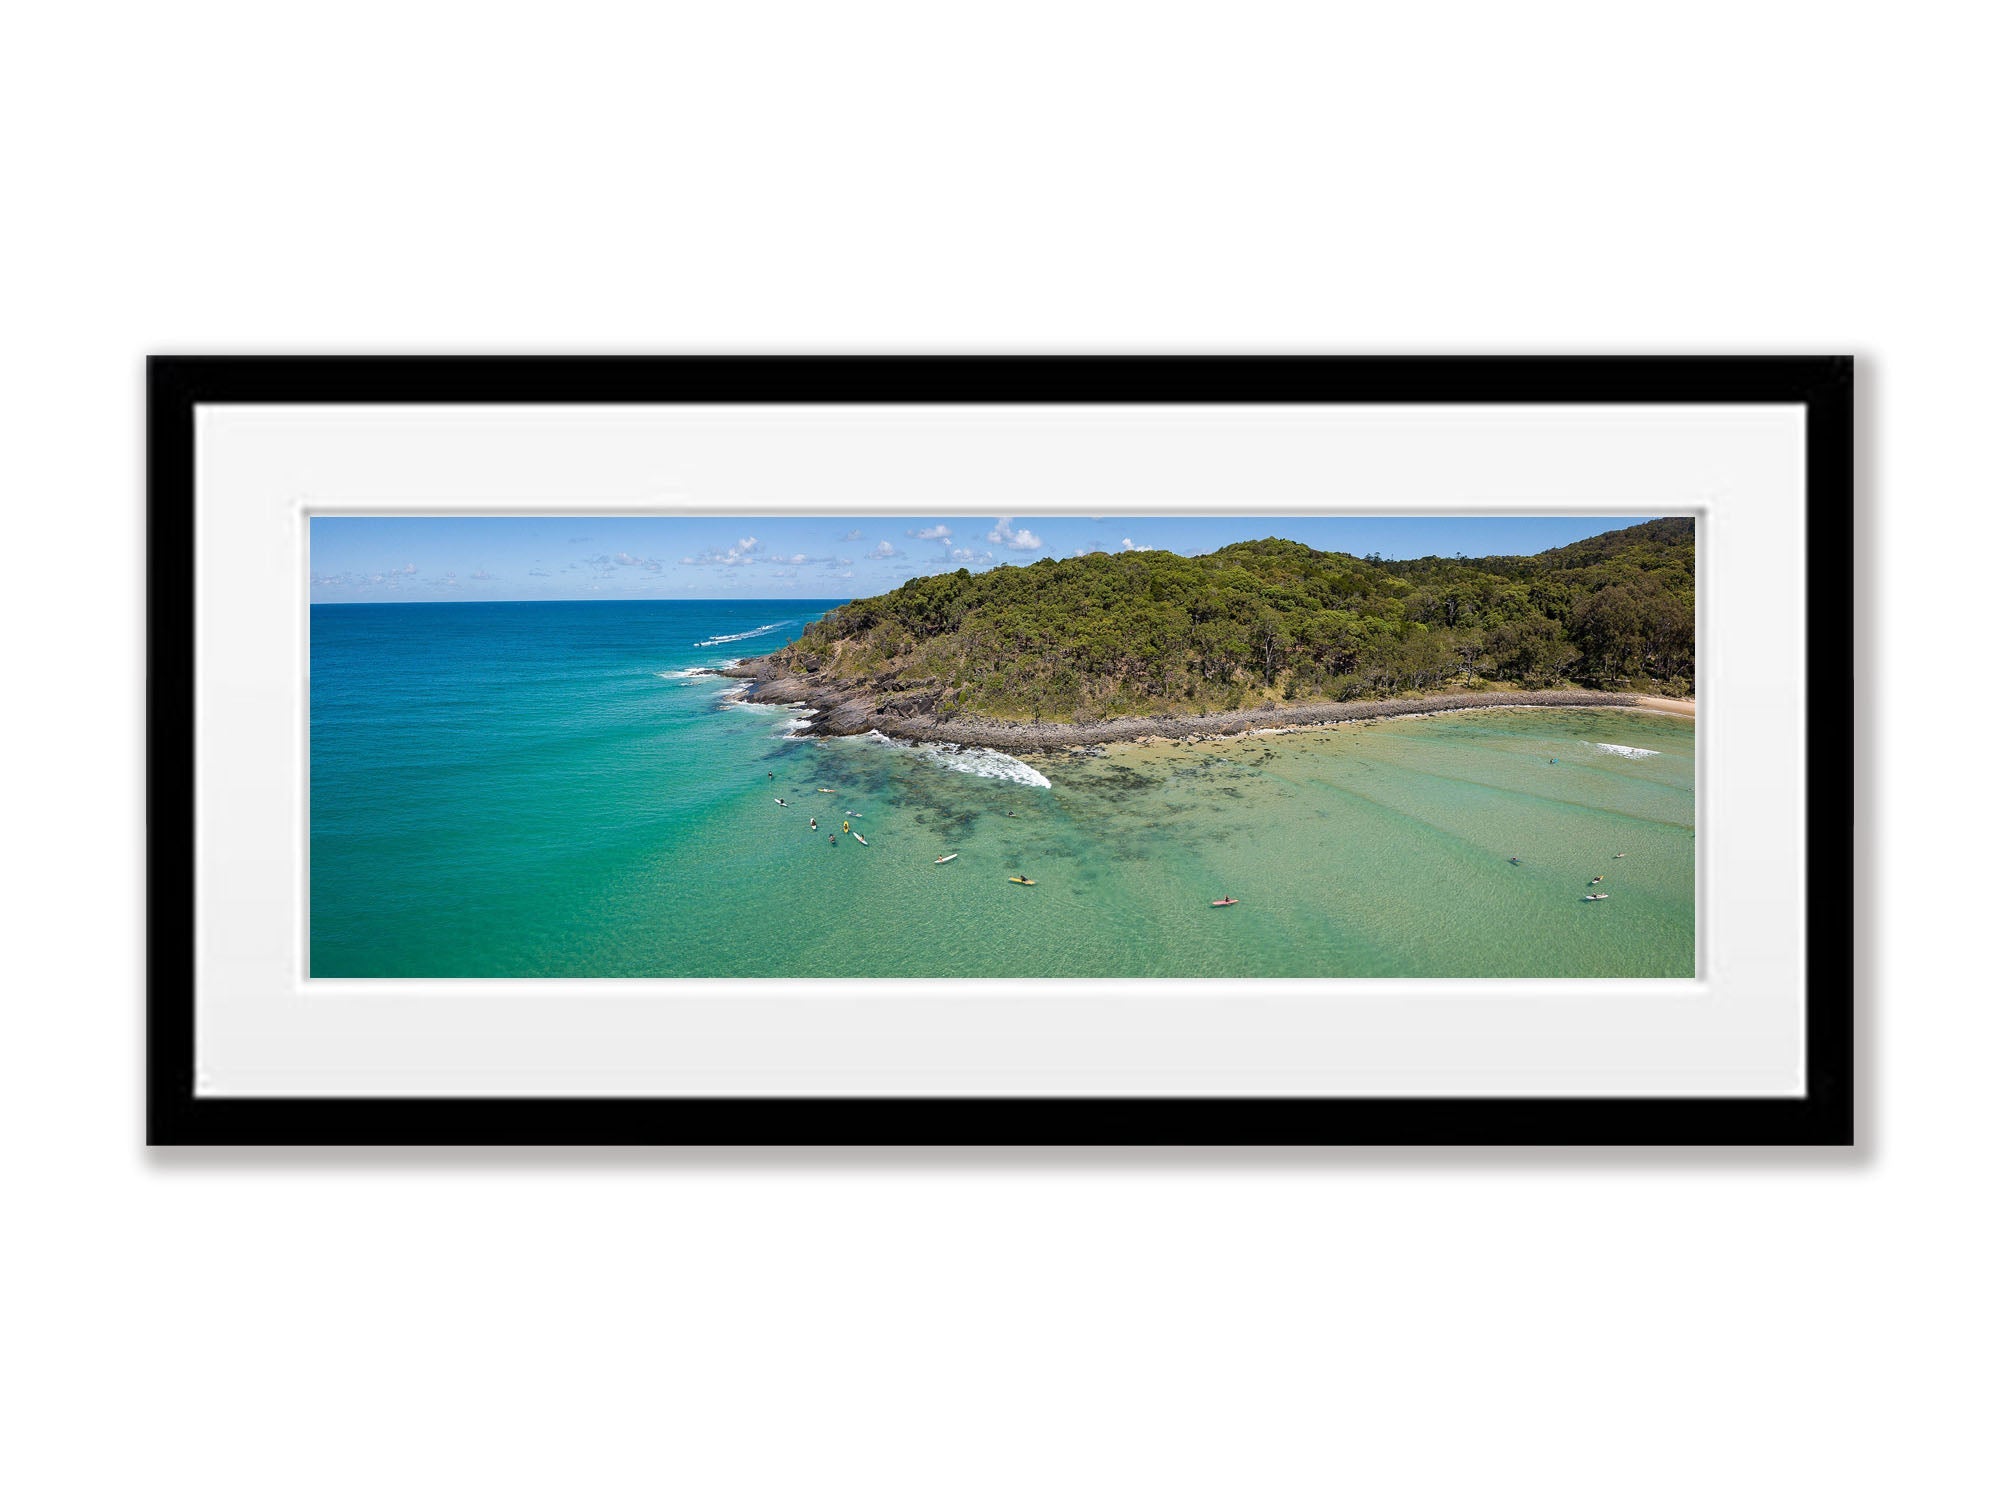 Surfers, Noosa National Park from above, Queensland